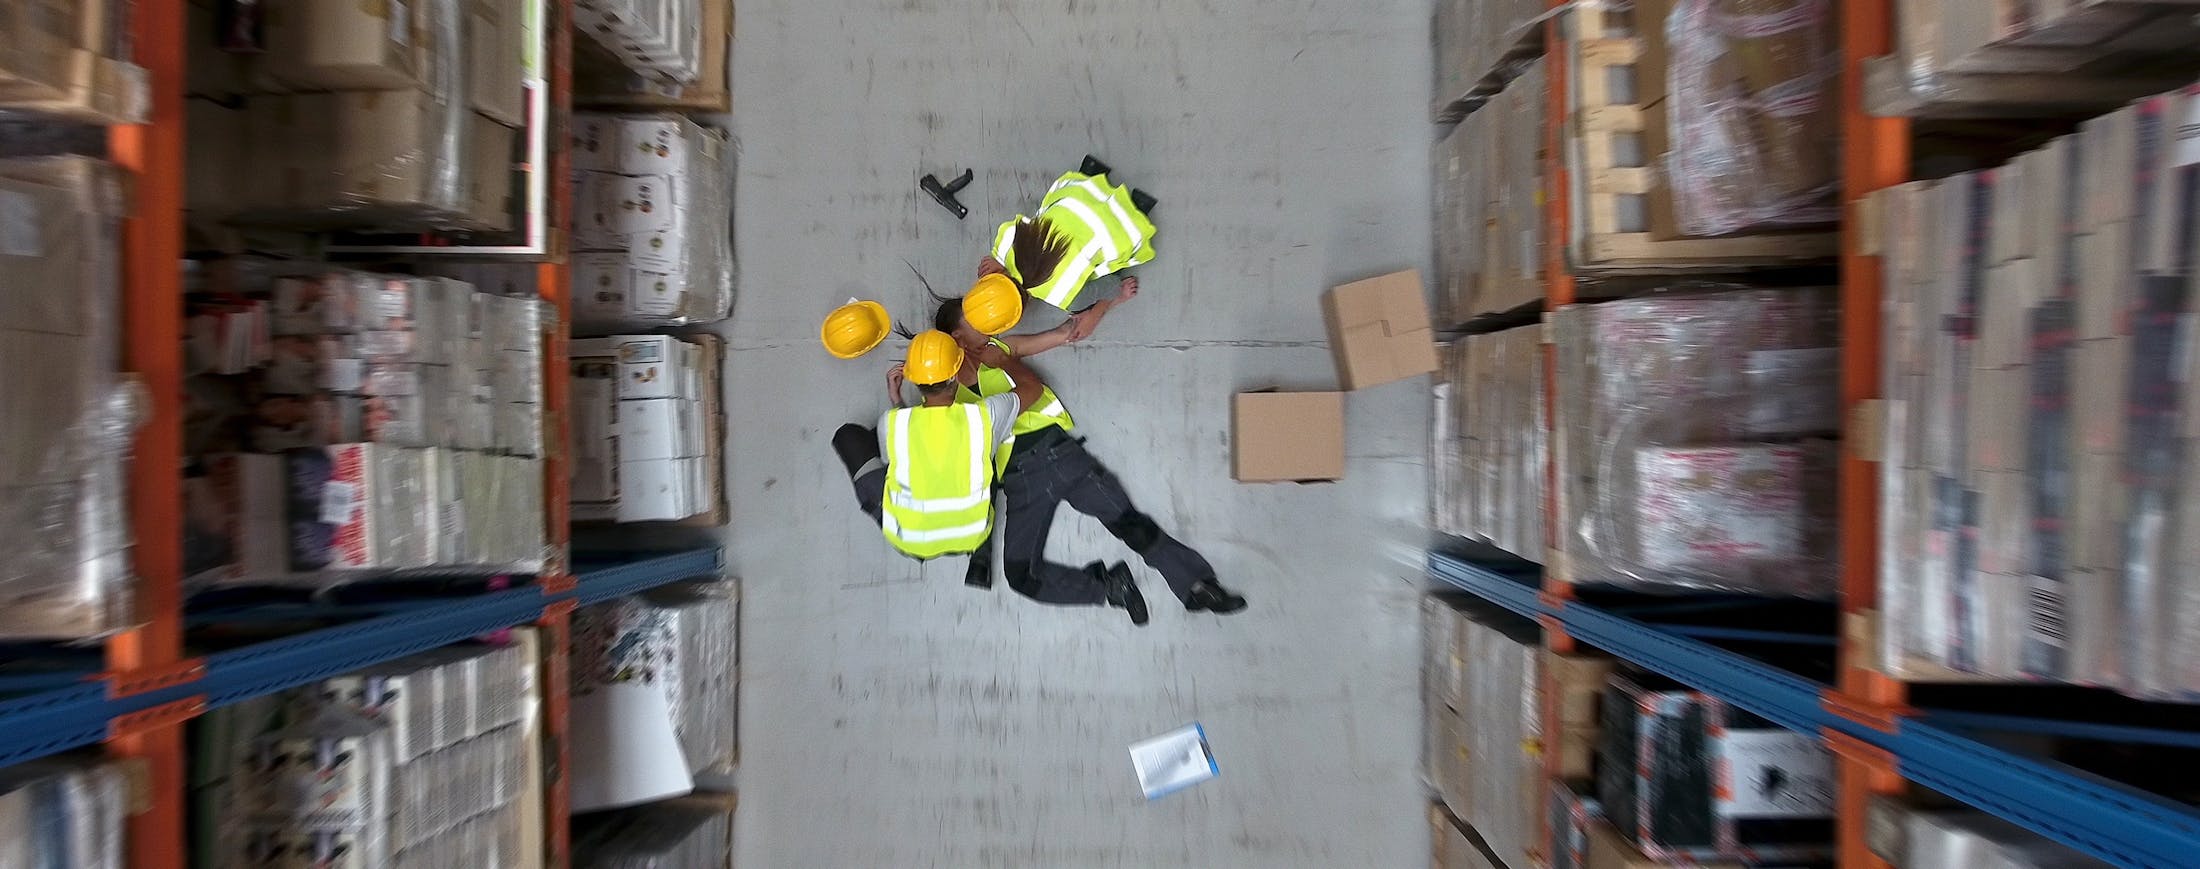 Perons Injured on Floor in a Warehouse - Workplace Injury Banner